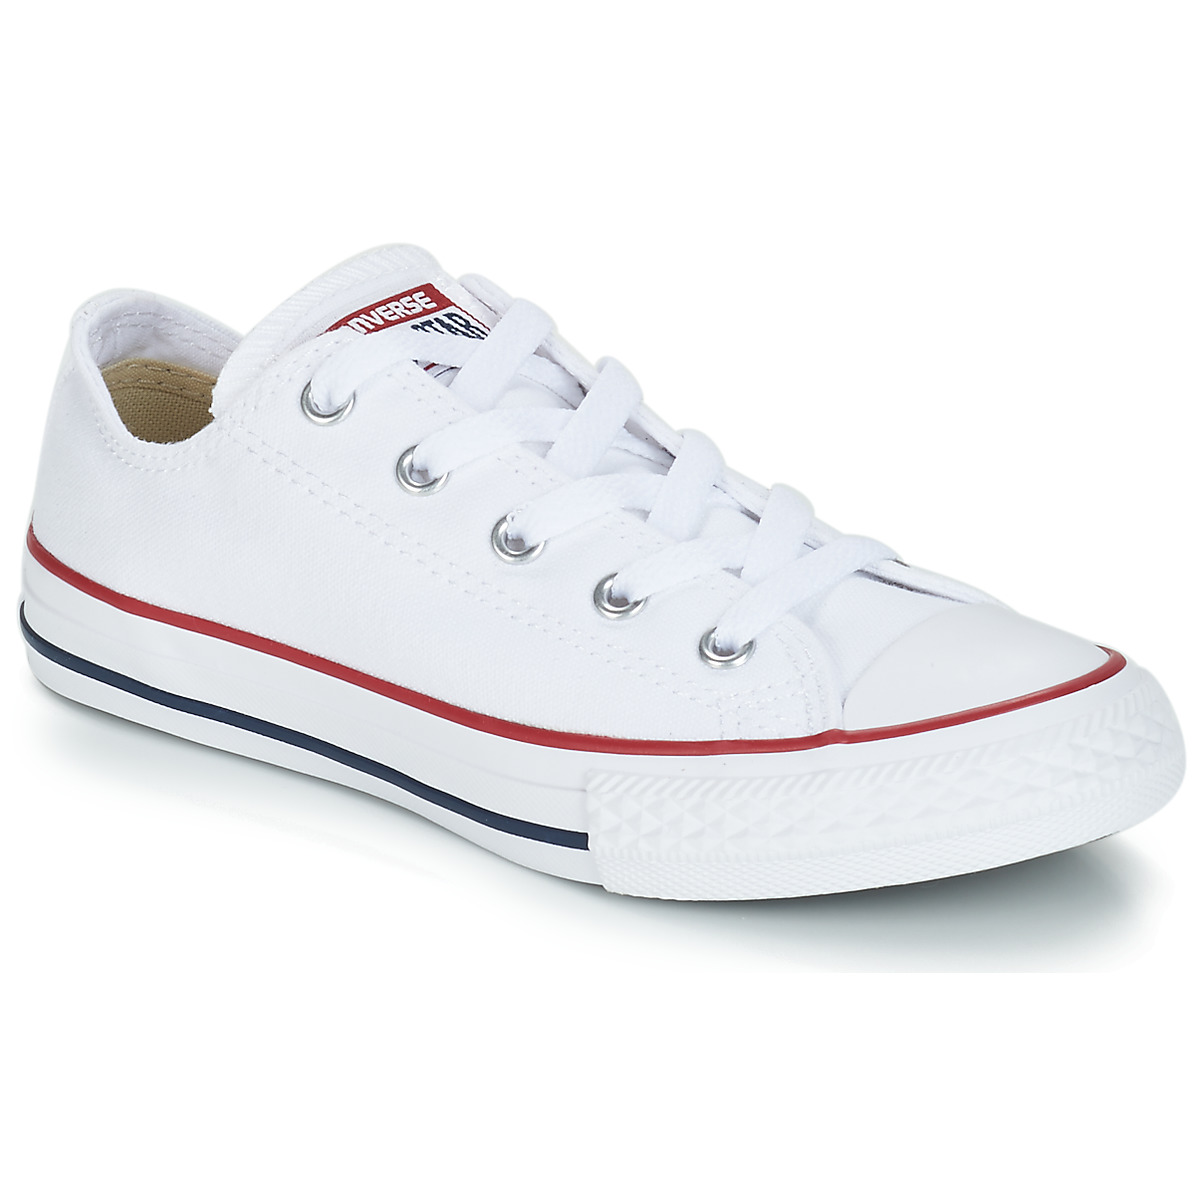 converse basse homme blanche